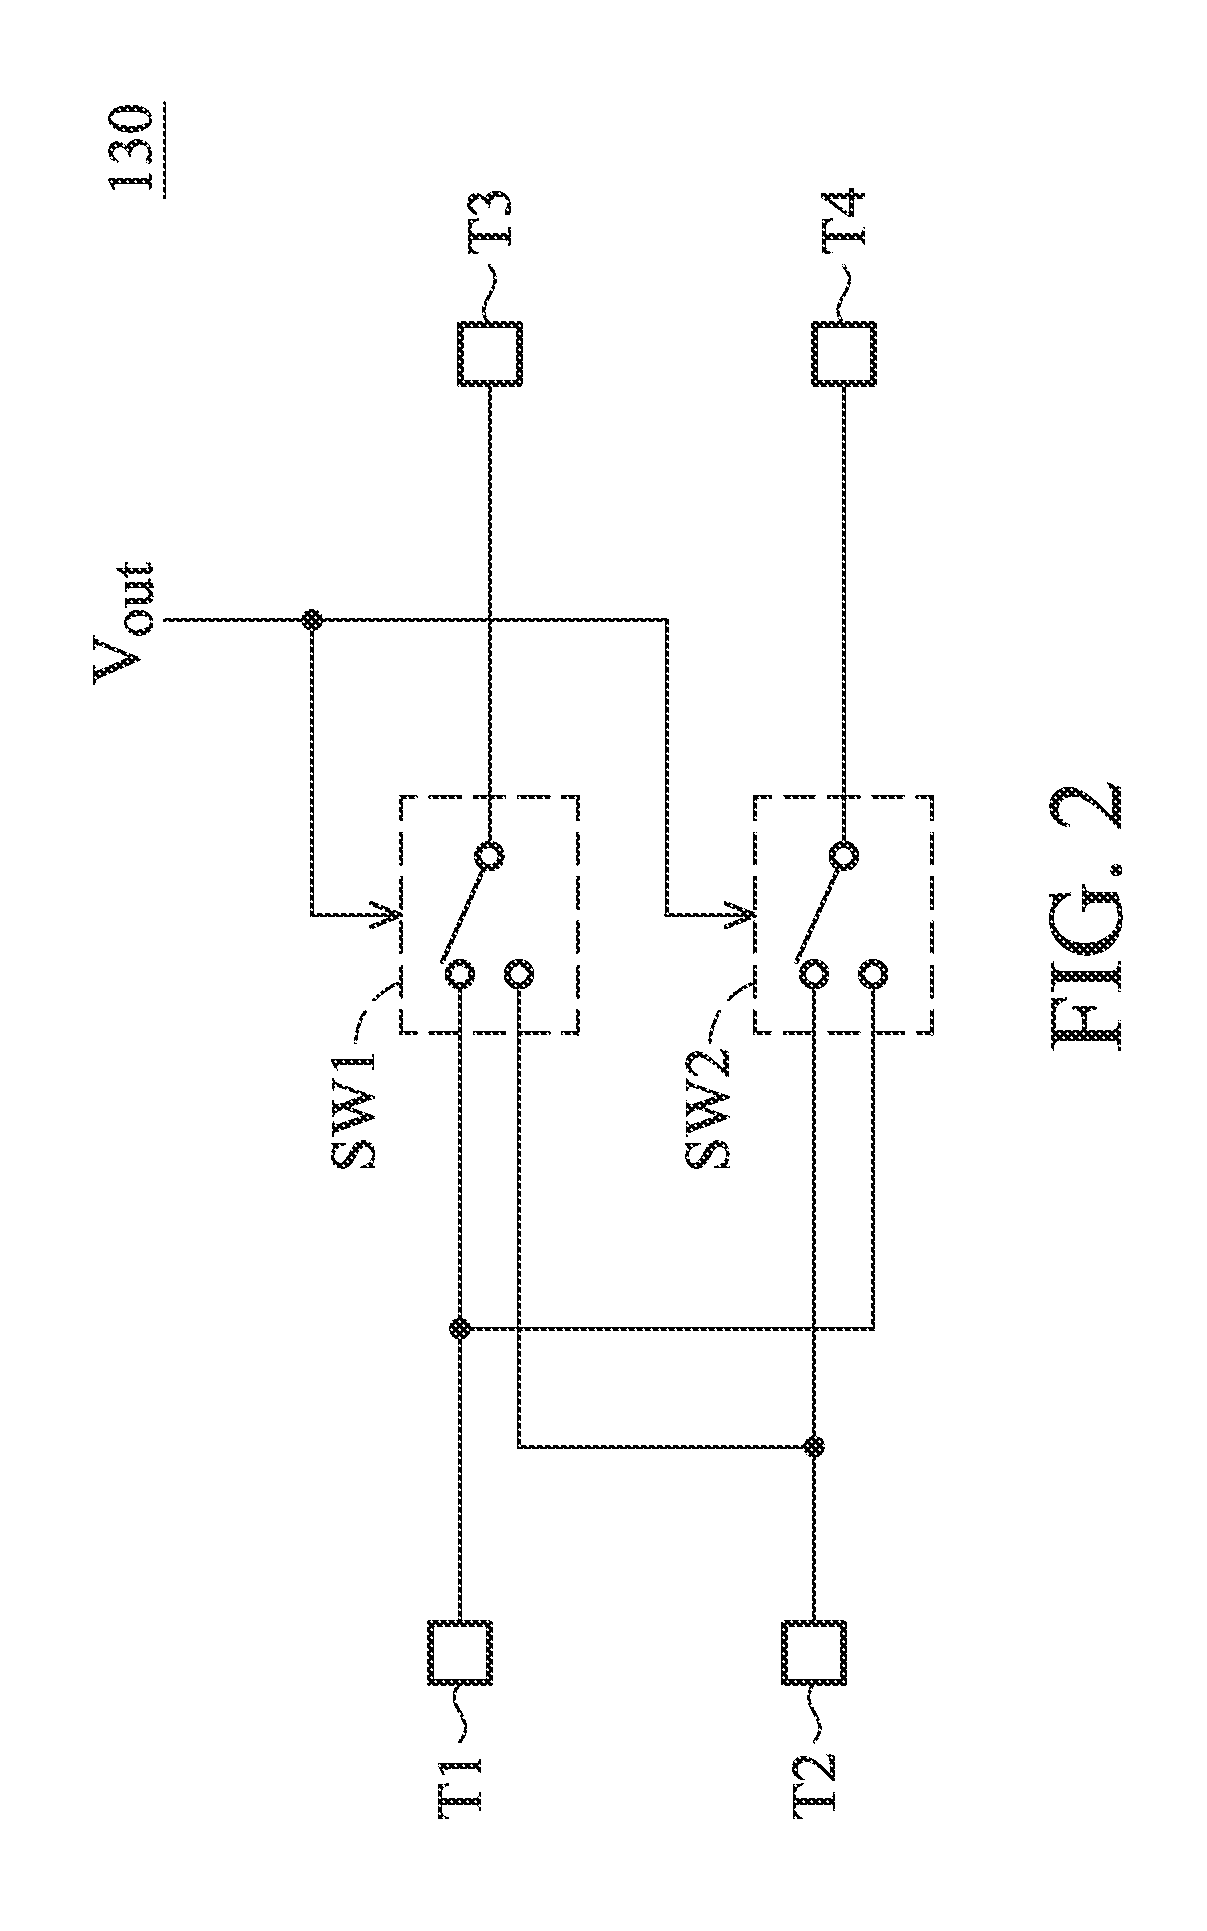 Comparator with transition threshold tracking capability